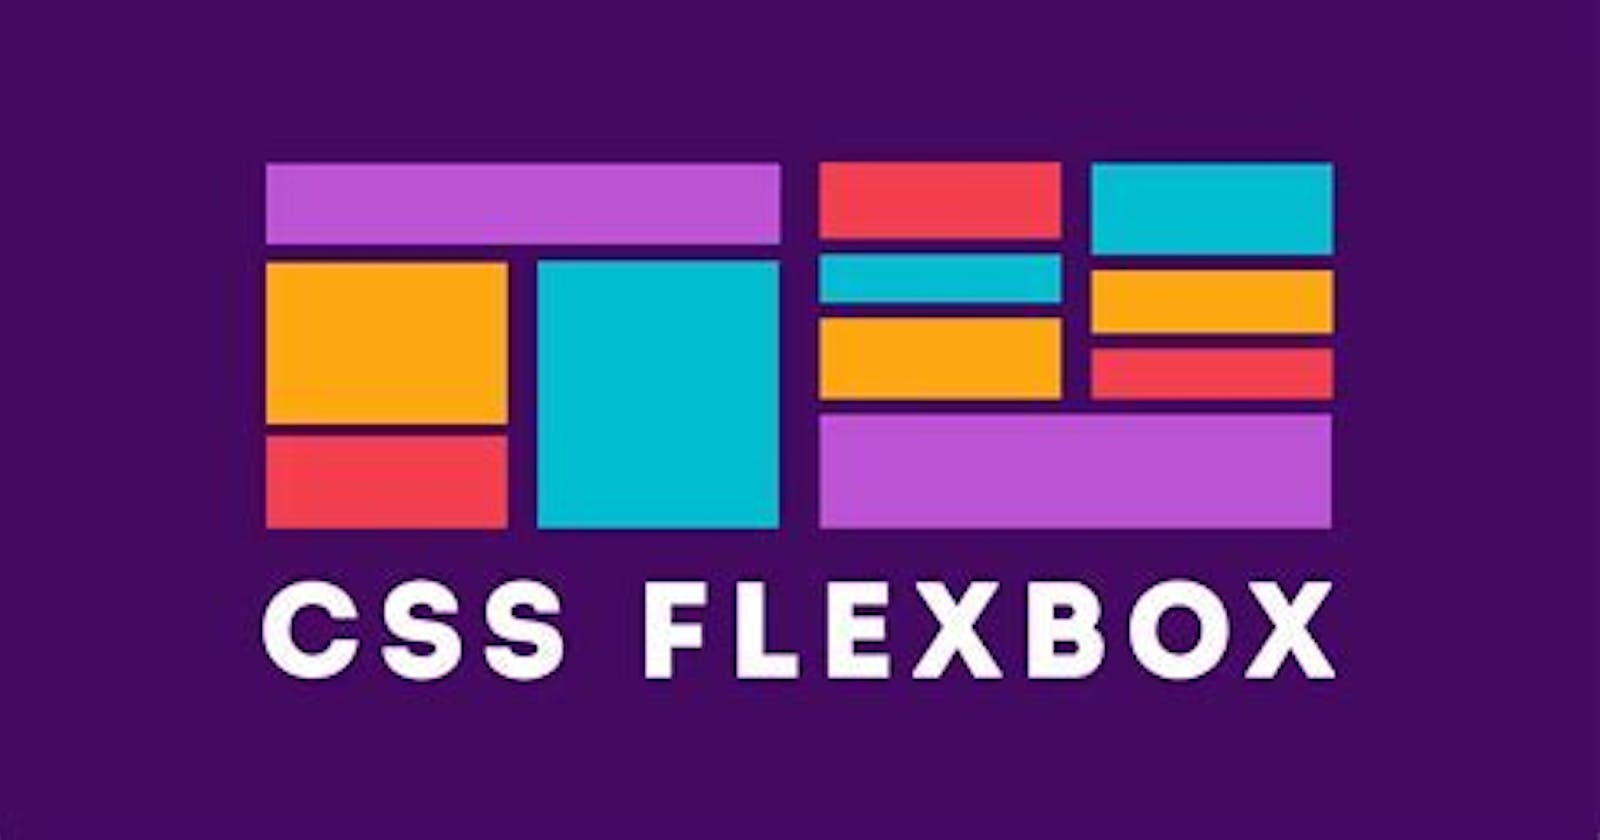 Master in CSS Flexbox in just few minute